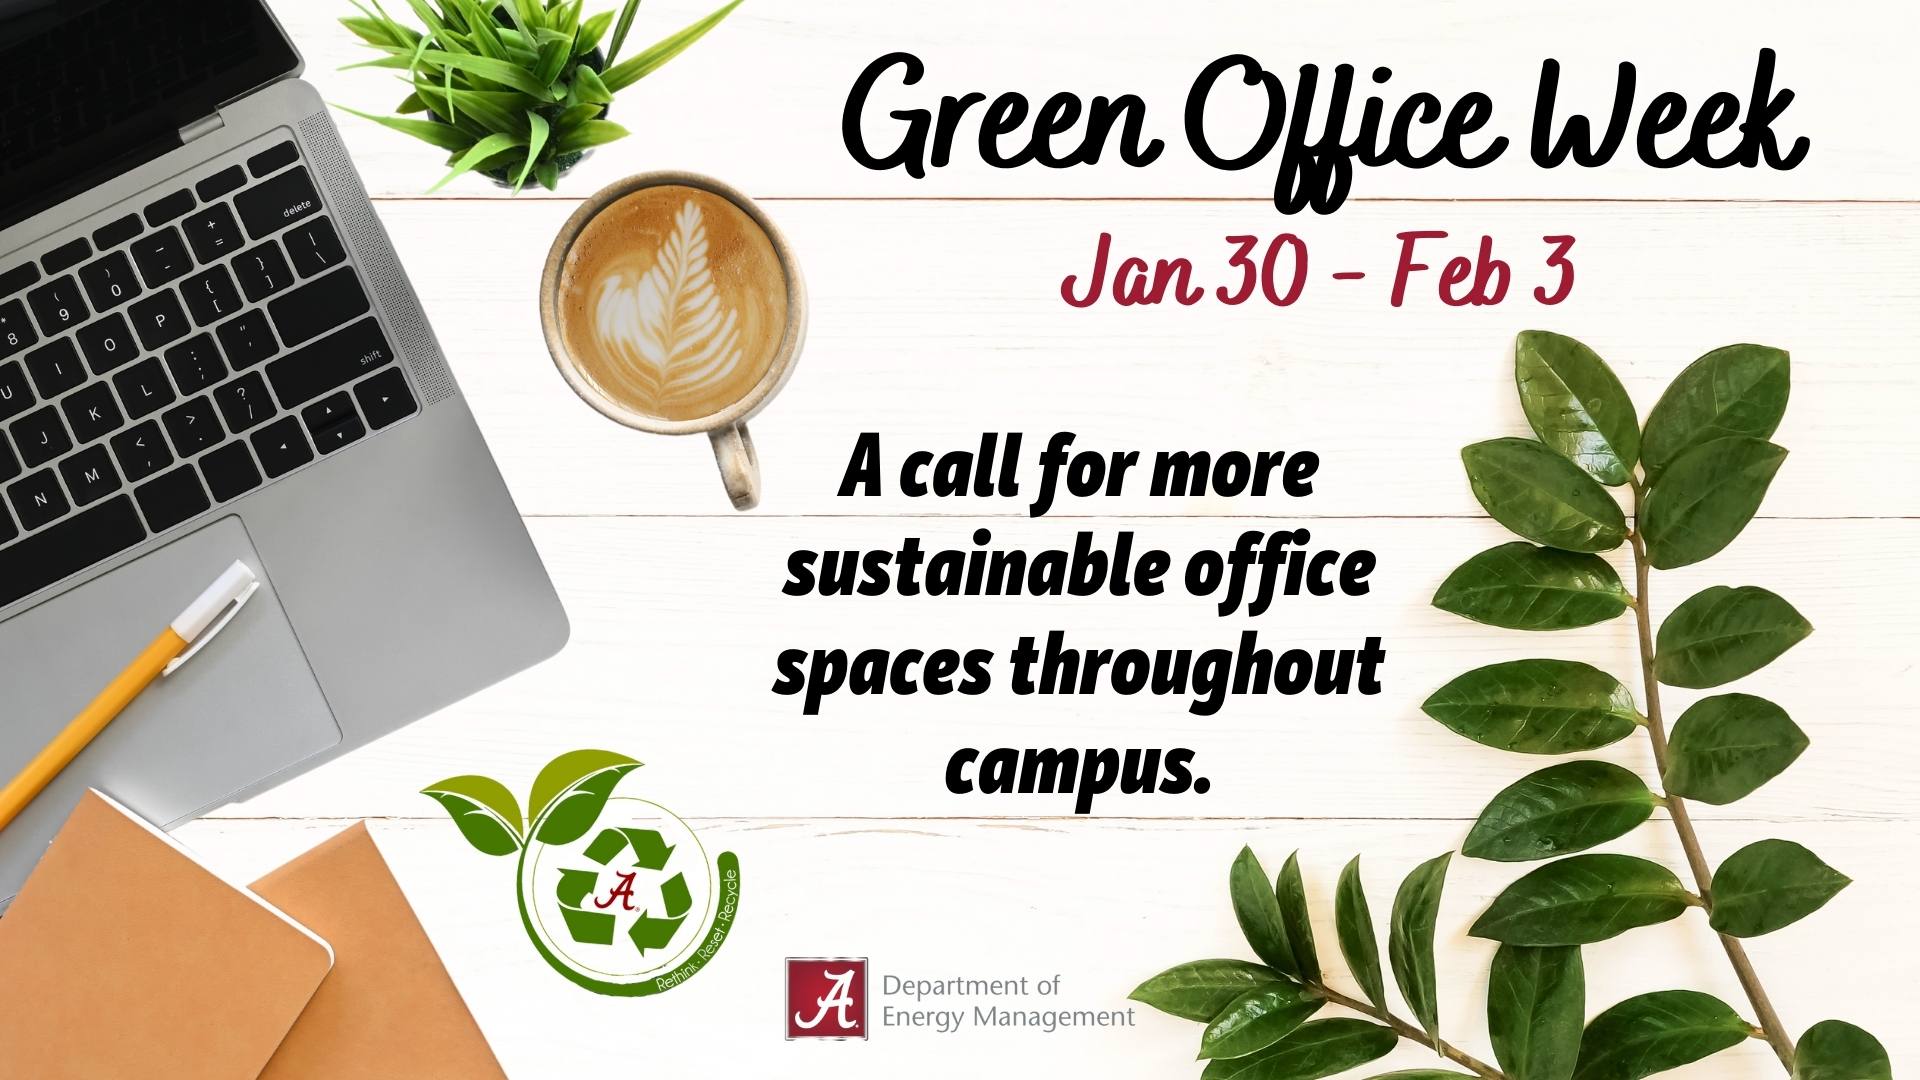 "Green Office Week, Jan 30-Feb 3, A call for more sustainable office spaces throughout campus, The Department of Energy Management"